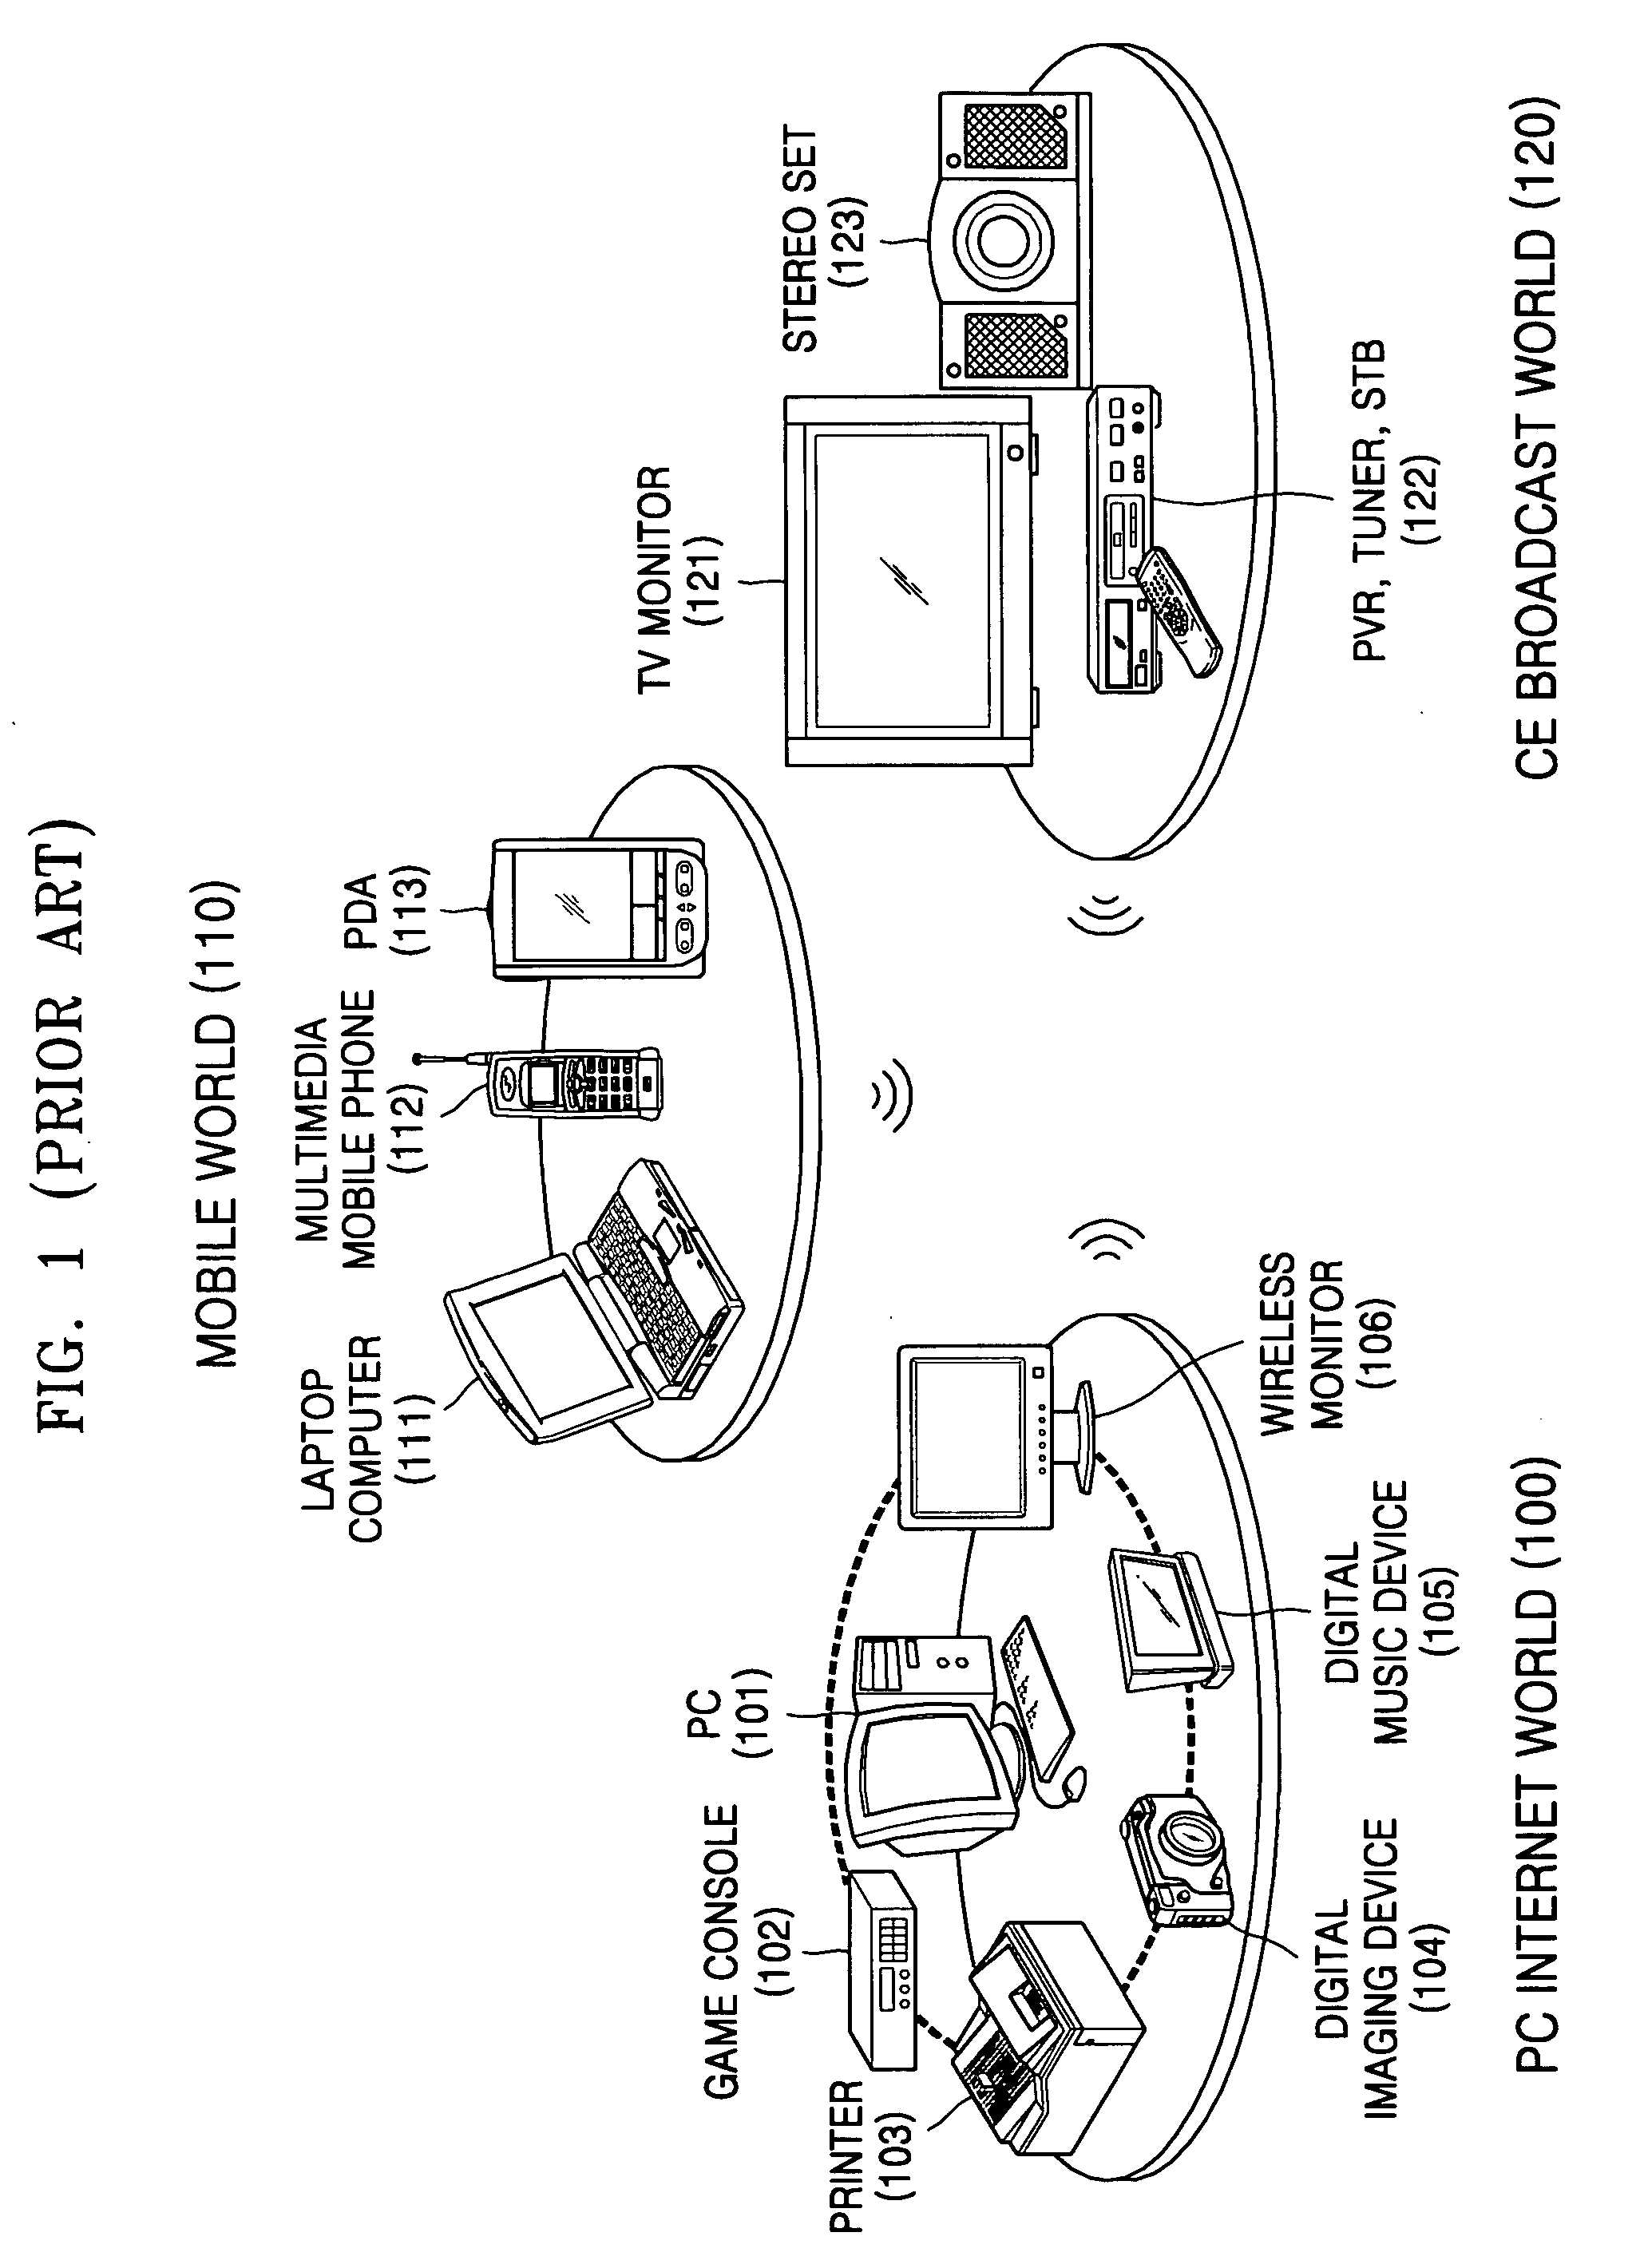 Device and method of controlling and providing content over a network